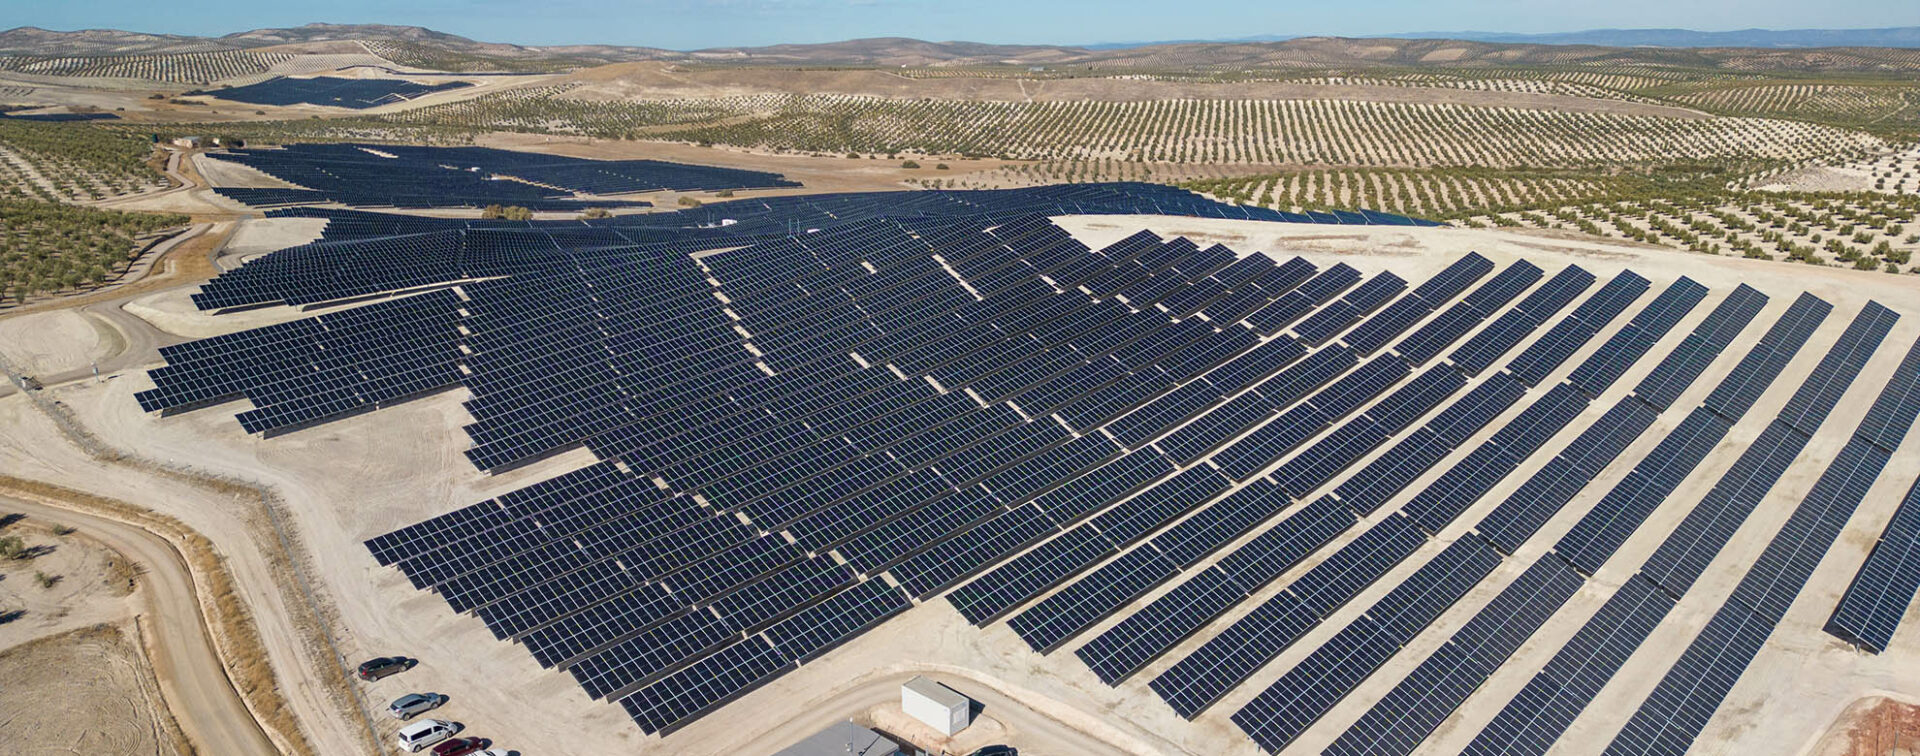 Solar energy plant from above situated in a wide, dry area.